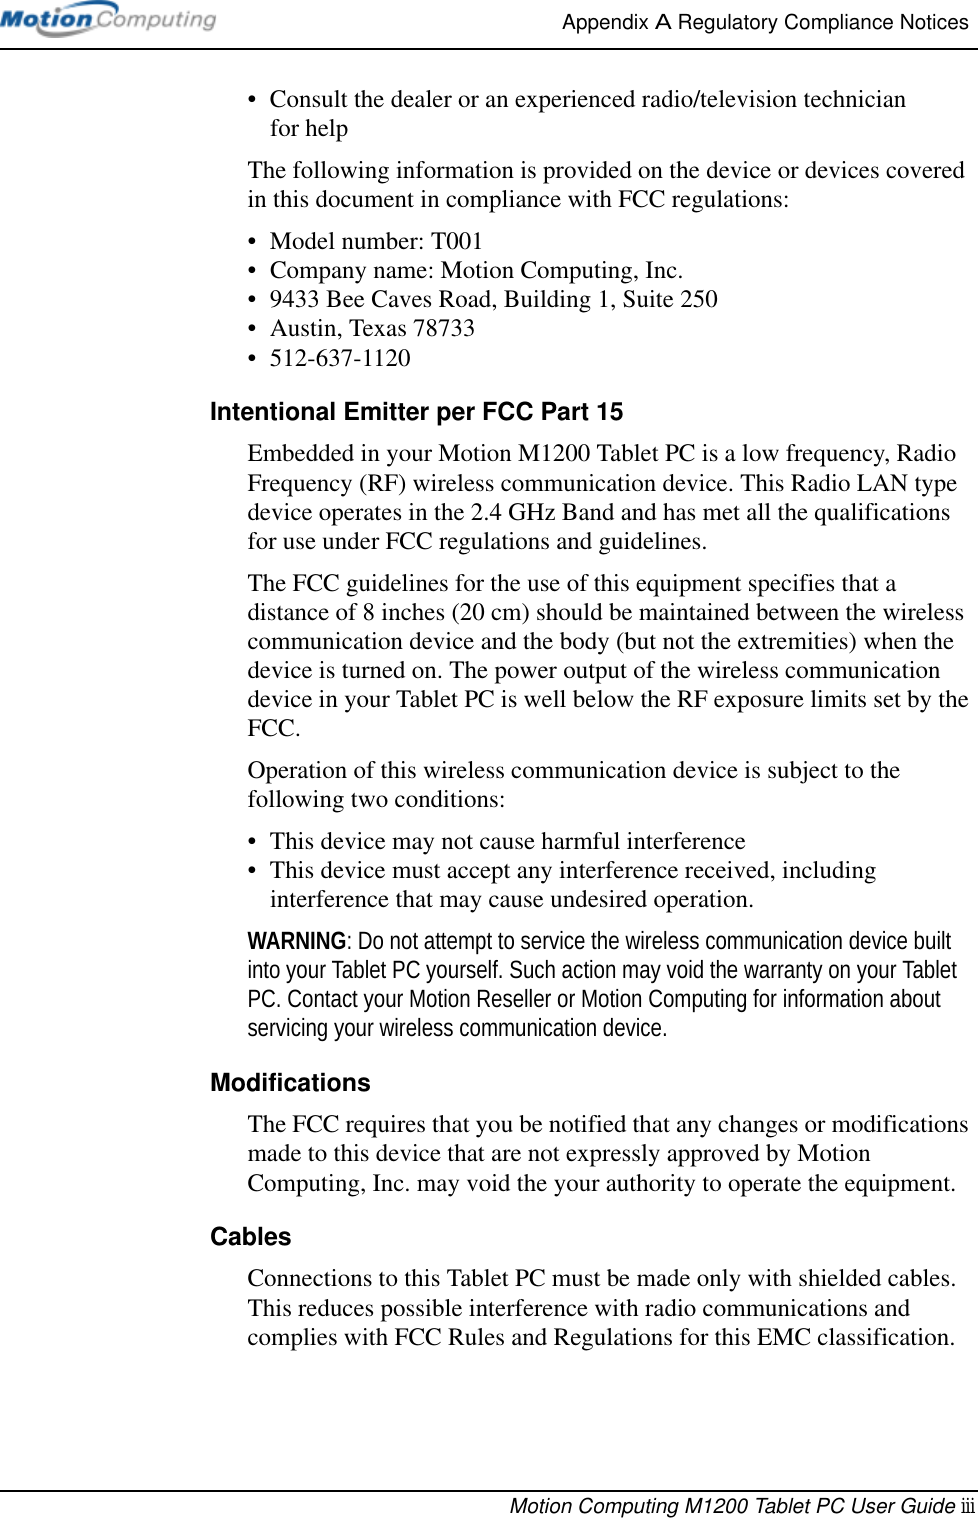 Appendix A Regulatory Compliance Notices Motion Computing M1200 Tablet PC User Guide iii• Consult the dealer or an experienced radio/television technician for helpThe following information is provided on the device or devices covered in this document in compliance with FCC regulations:• Model number: T001• Company name: Motion Computing, Inc.• 9433 Bee Caves Road, Building 1, Suite 250• Austin, Texas 78733• 512-637-1120Intentional Emitter per FCC Part 15Embedded in your Motion M1200 Tablet PC is a low frequency, Radio Frequency (RF) wireless communication device. This Radio LAN type device operates in the 2.4 GHz Band and has met all the qualifications for use under FCC regulations and guidelines.The FCC guidelines for the use of this equipment specifies that a distance of 8 inches (20 cm) should be maintained between the wireless communication device and the body (but not the extremities) when the device is turned on. The power output of the wireless communication device in your Tablet PC is well below the RF exposure limits set by the FCC.Operation of this wireless communication device is subject to the following two conditions:• This device may not cause harmful interference• This device must accept any interference received, including interference that may cause undesired operation.WARNING: Do not attempt to service the wireless communication device built into your Tablet PC yourself. Such action may void the warranty on your Tablet PC. Contact your Motion Reseller or Motion Computing for information about servicing your wireless communication device.ModificationsThe FCC requires that you be notified that any changes or modifications made to this device that are not expressly approved by Motion Computing, Inc. may void the your authority to operate the equipment.CablesConnections to this Tablet PC must be made only with shielded cables. This reduces possible interference with radio communications and complies with FCC Rules and Regulations for this EMC classification.